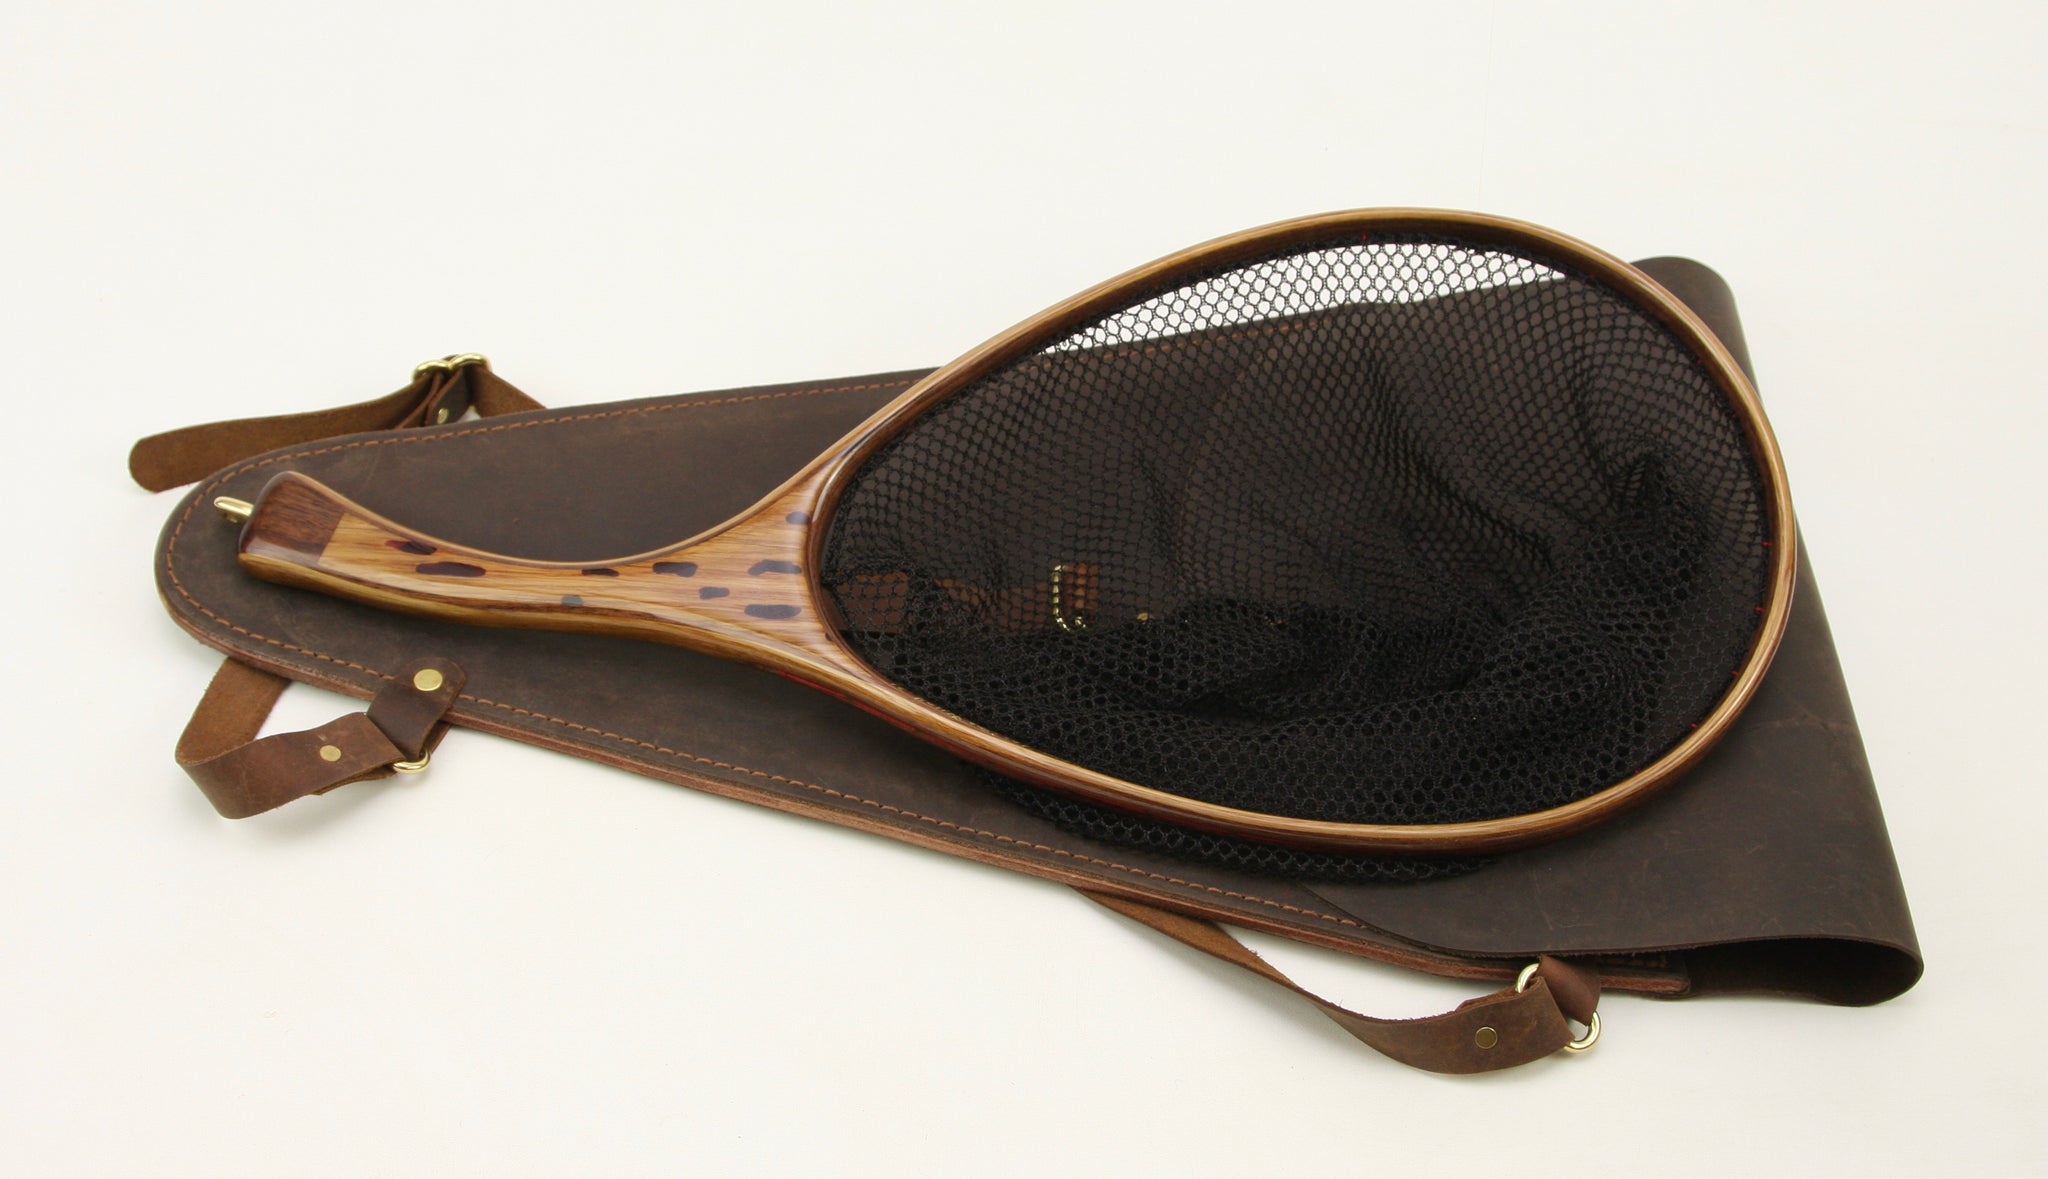 Medium sized landing net with Uniquely carved cherry handle - Nets